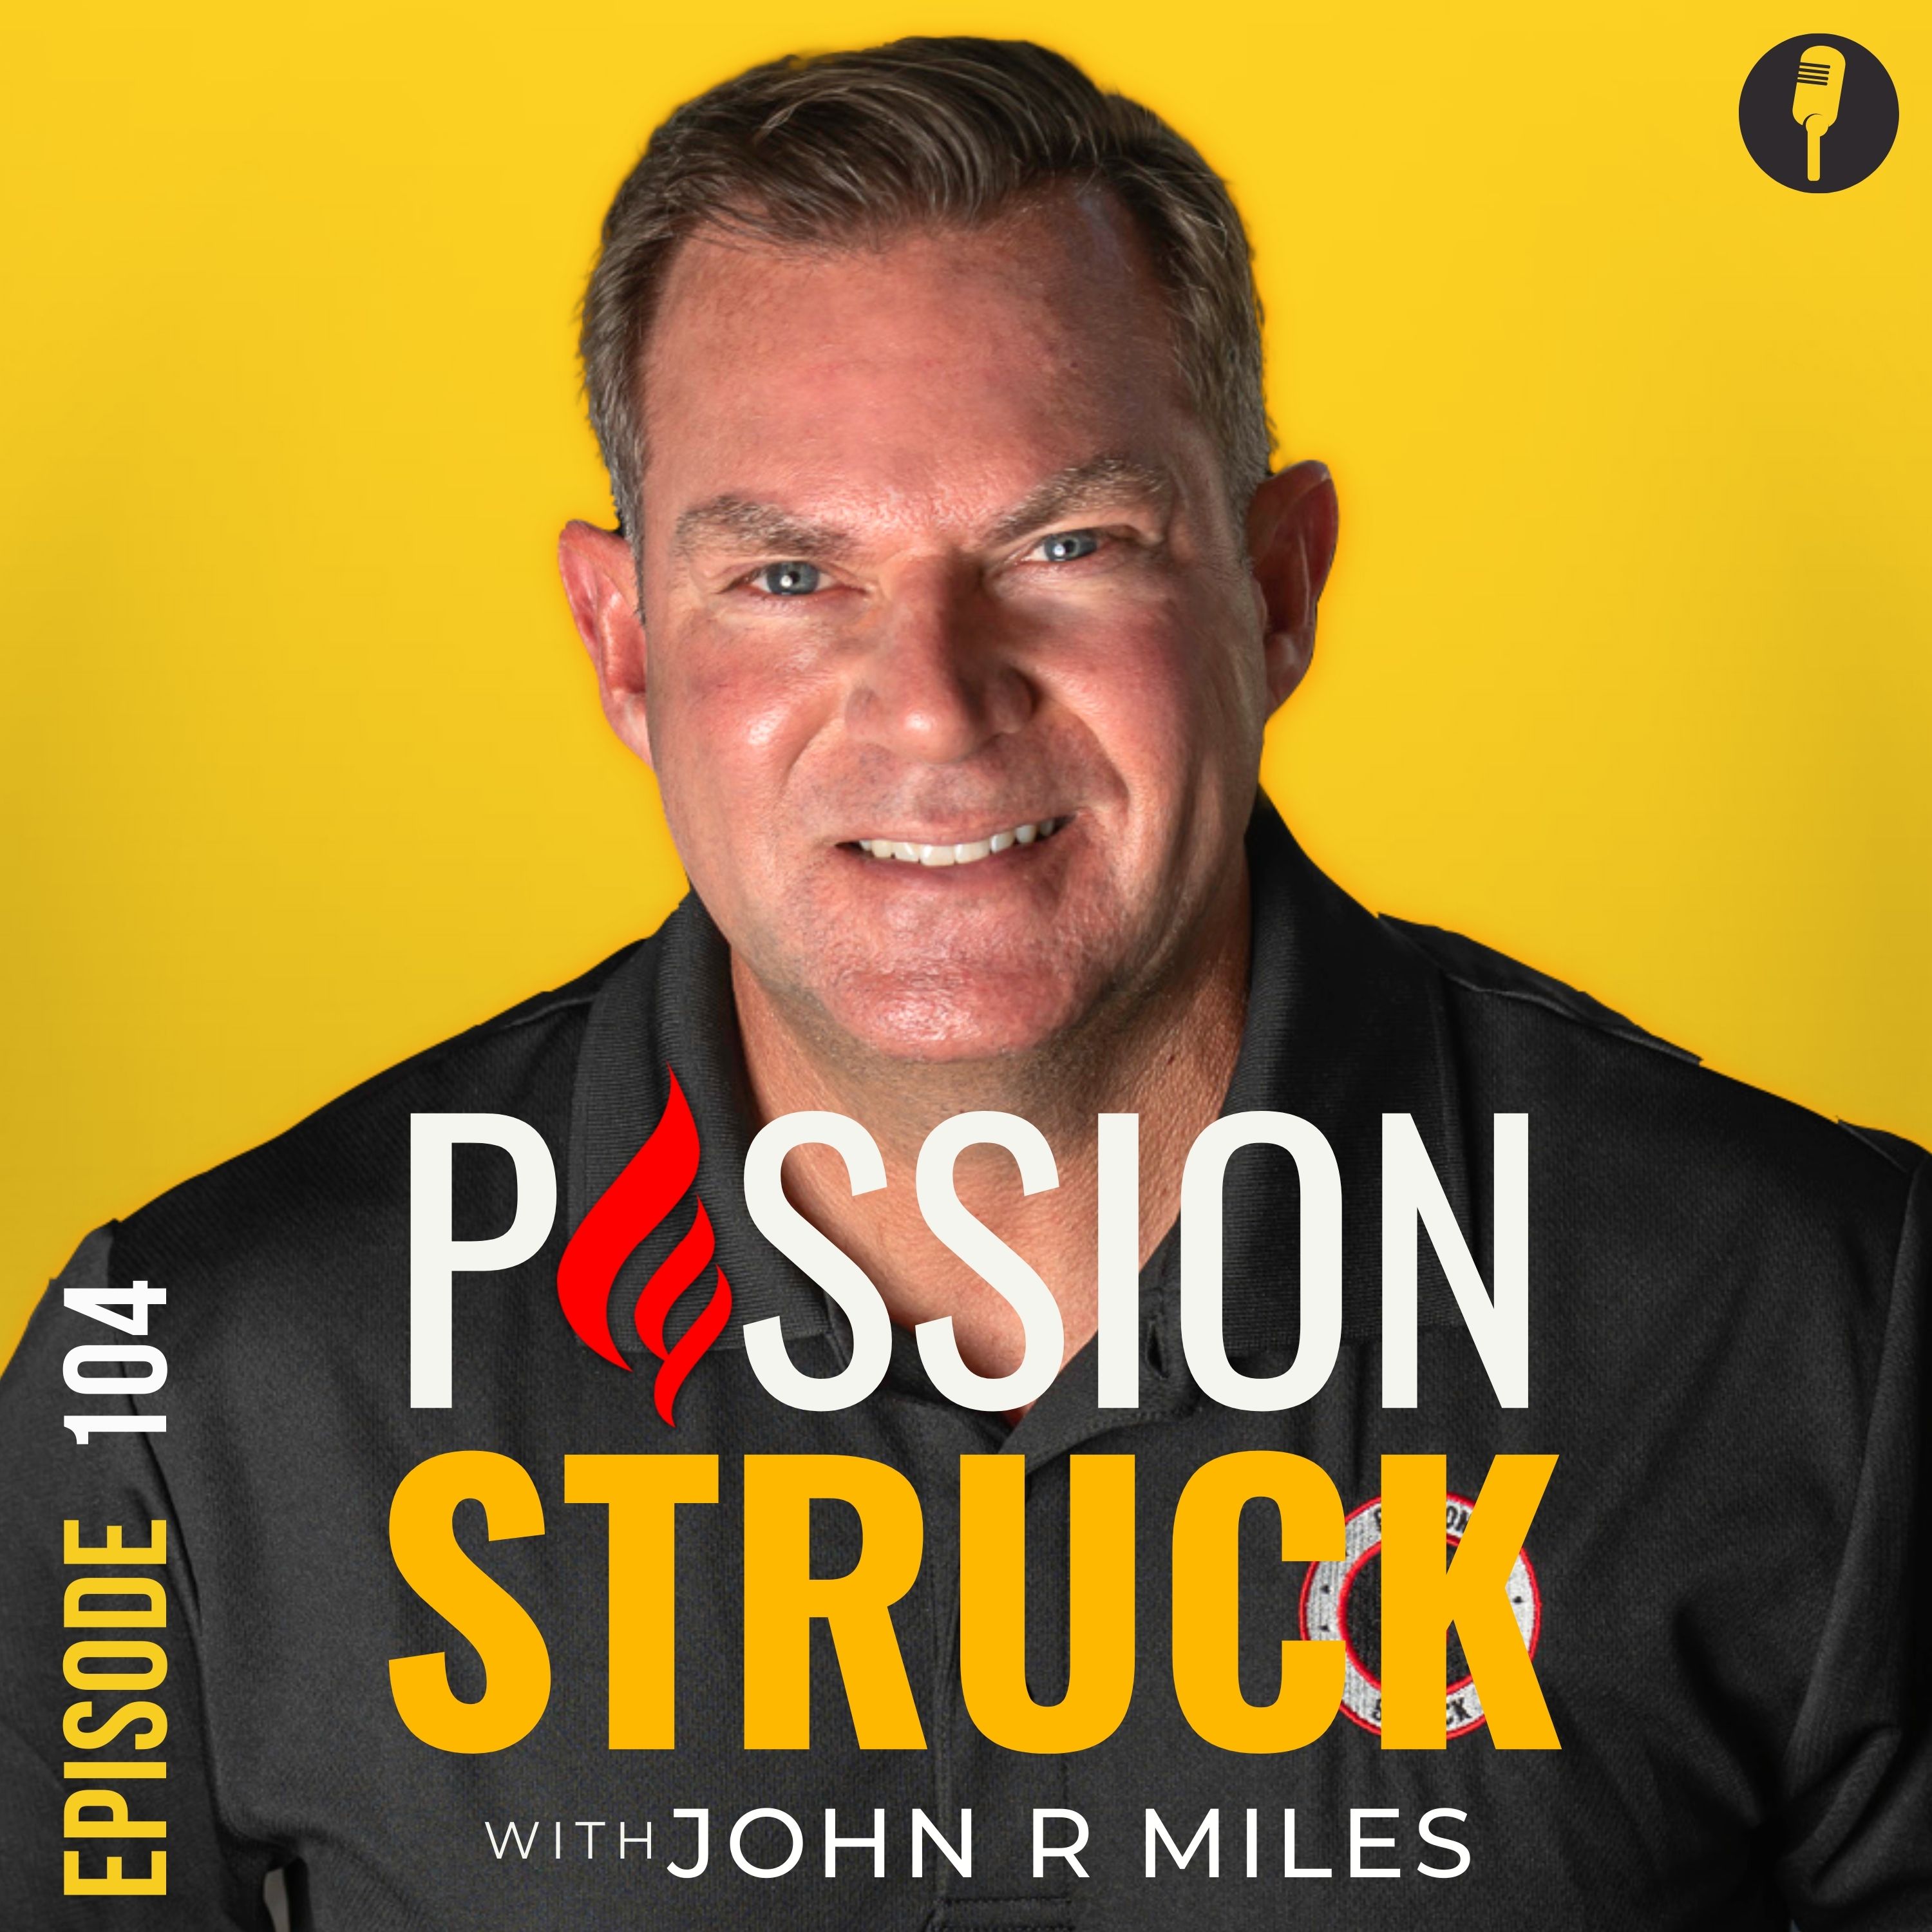 Passion Struck Album cover with John R. Miles Episode 104 on Self Love